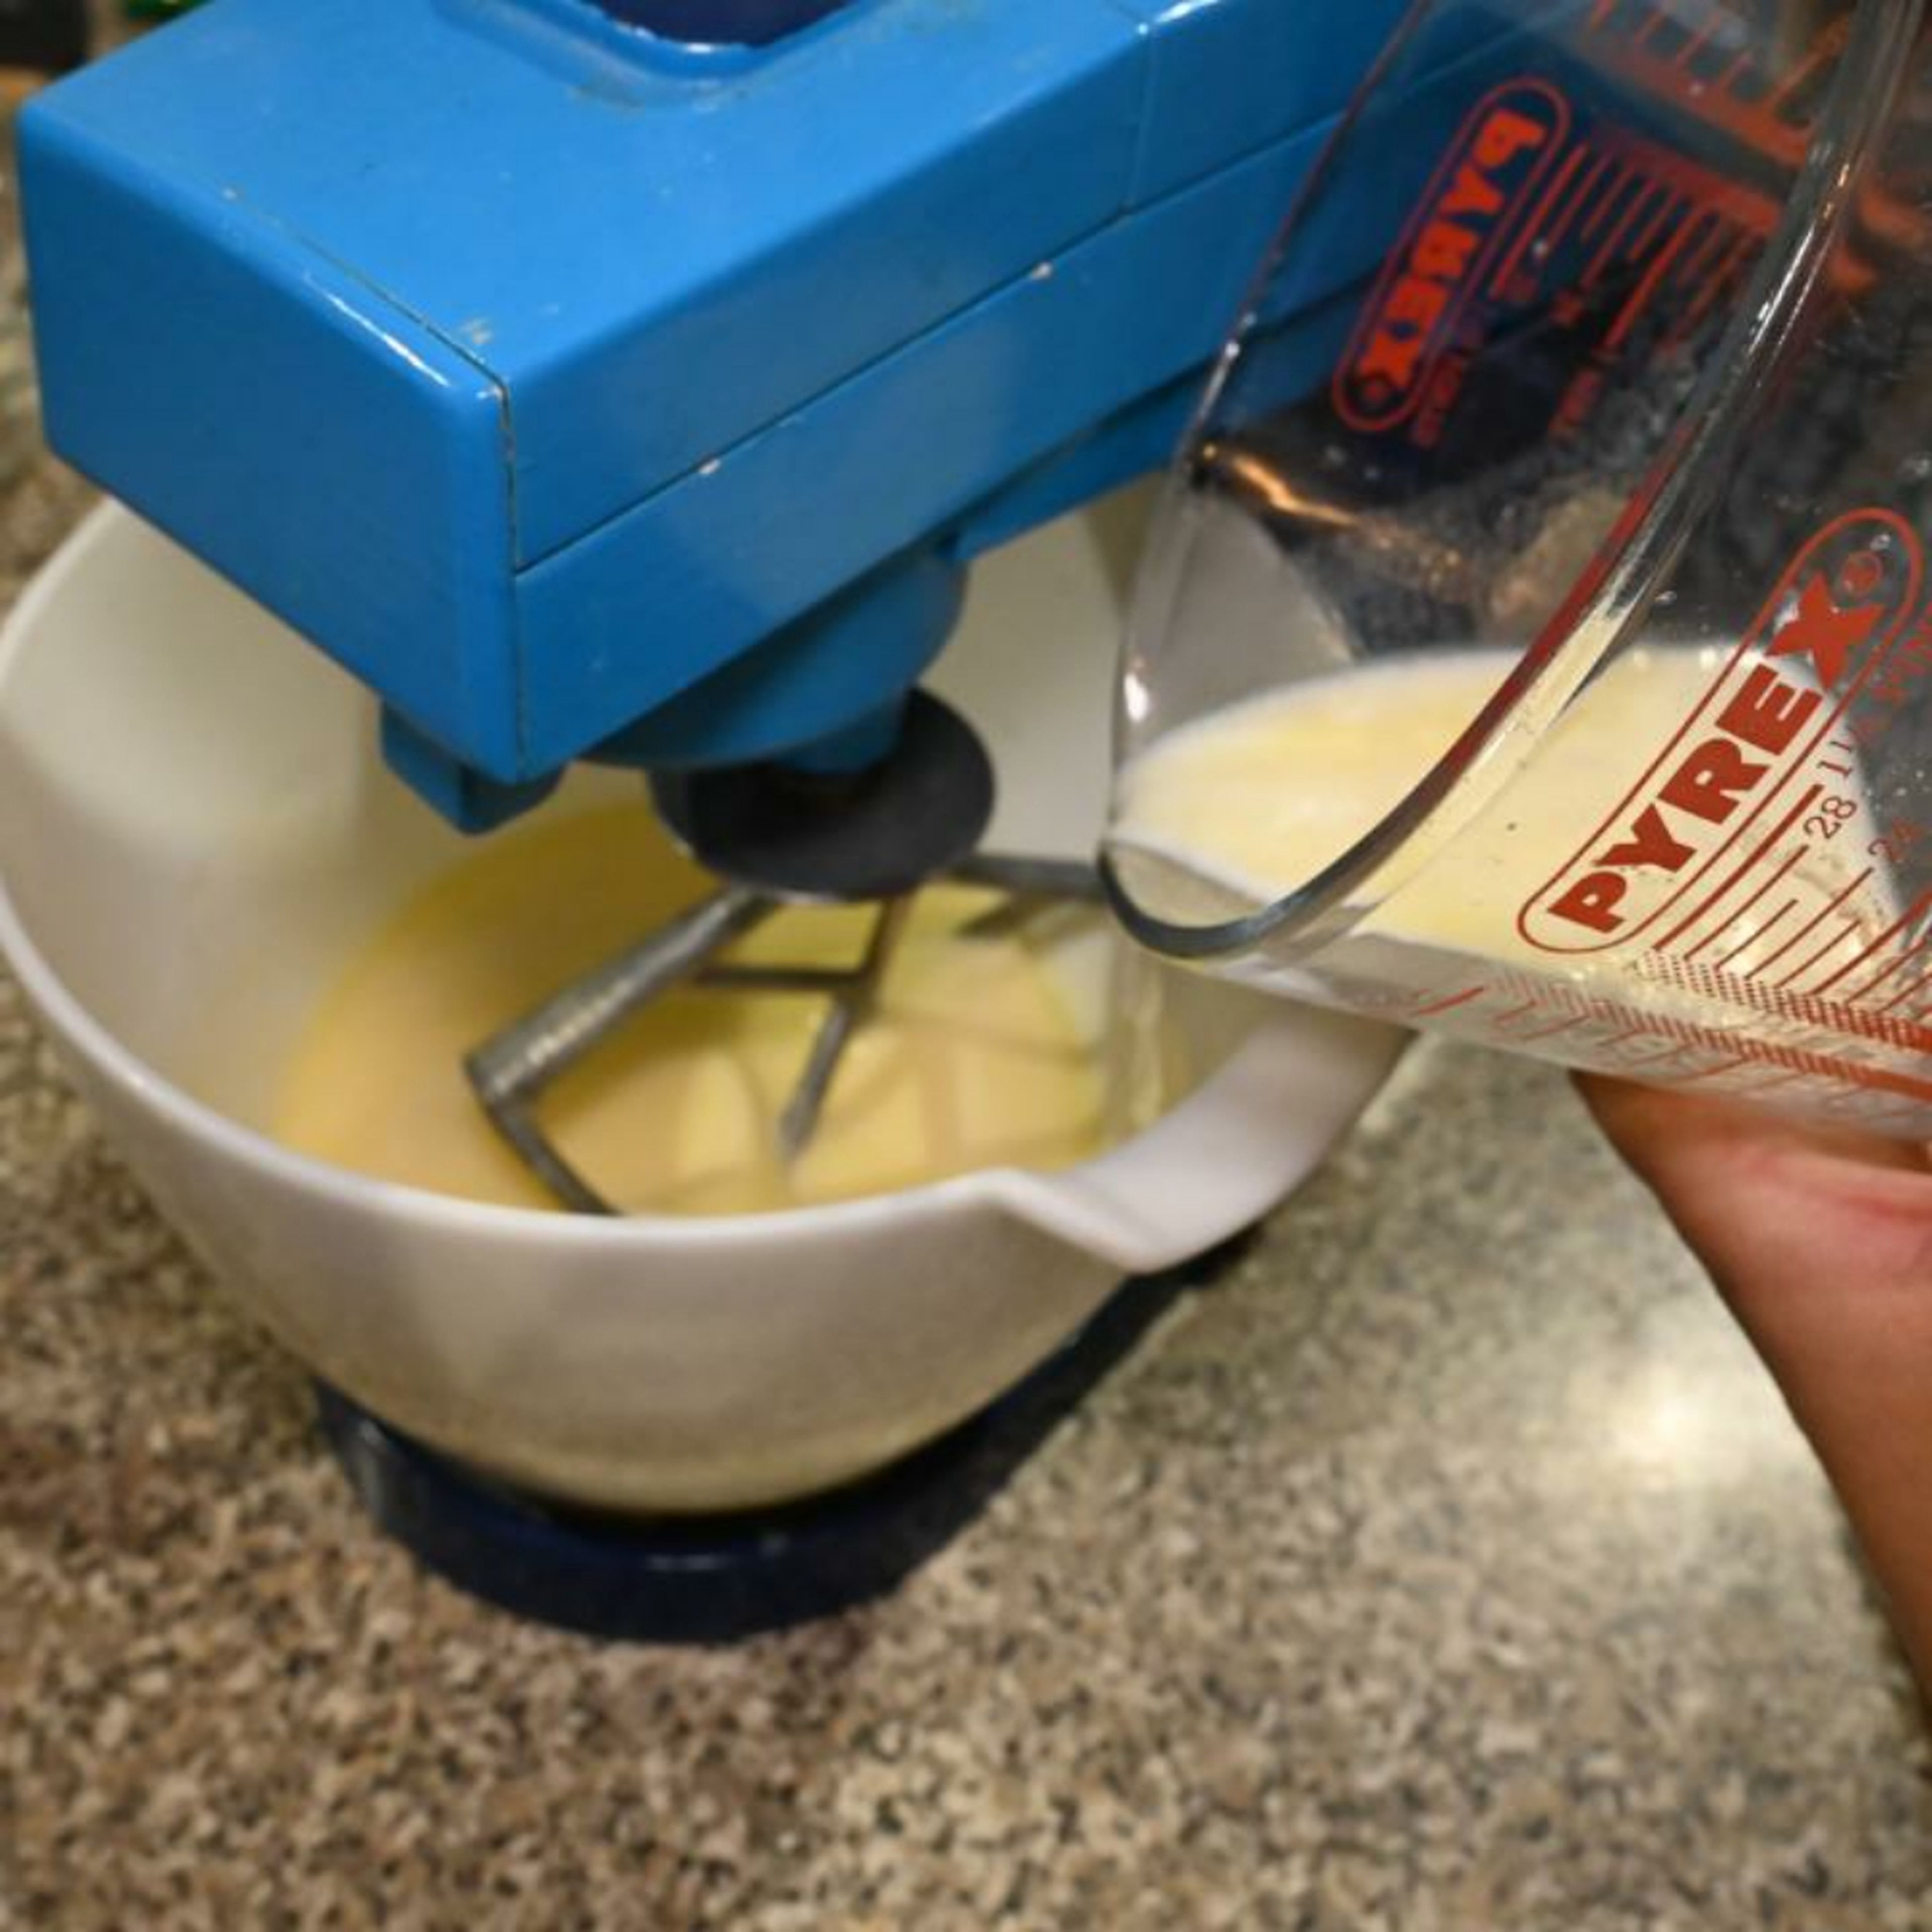 Add the prepared buttermilk to the egg mixture and continue whisking at low speed.